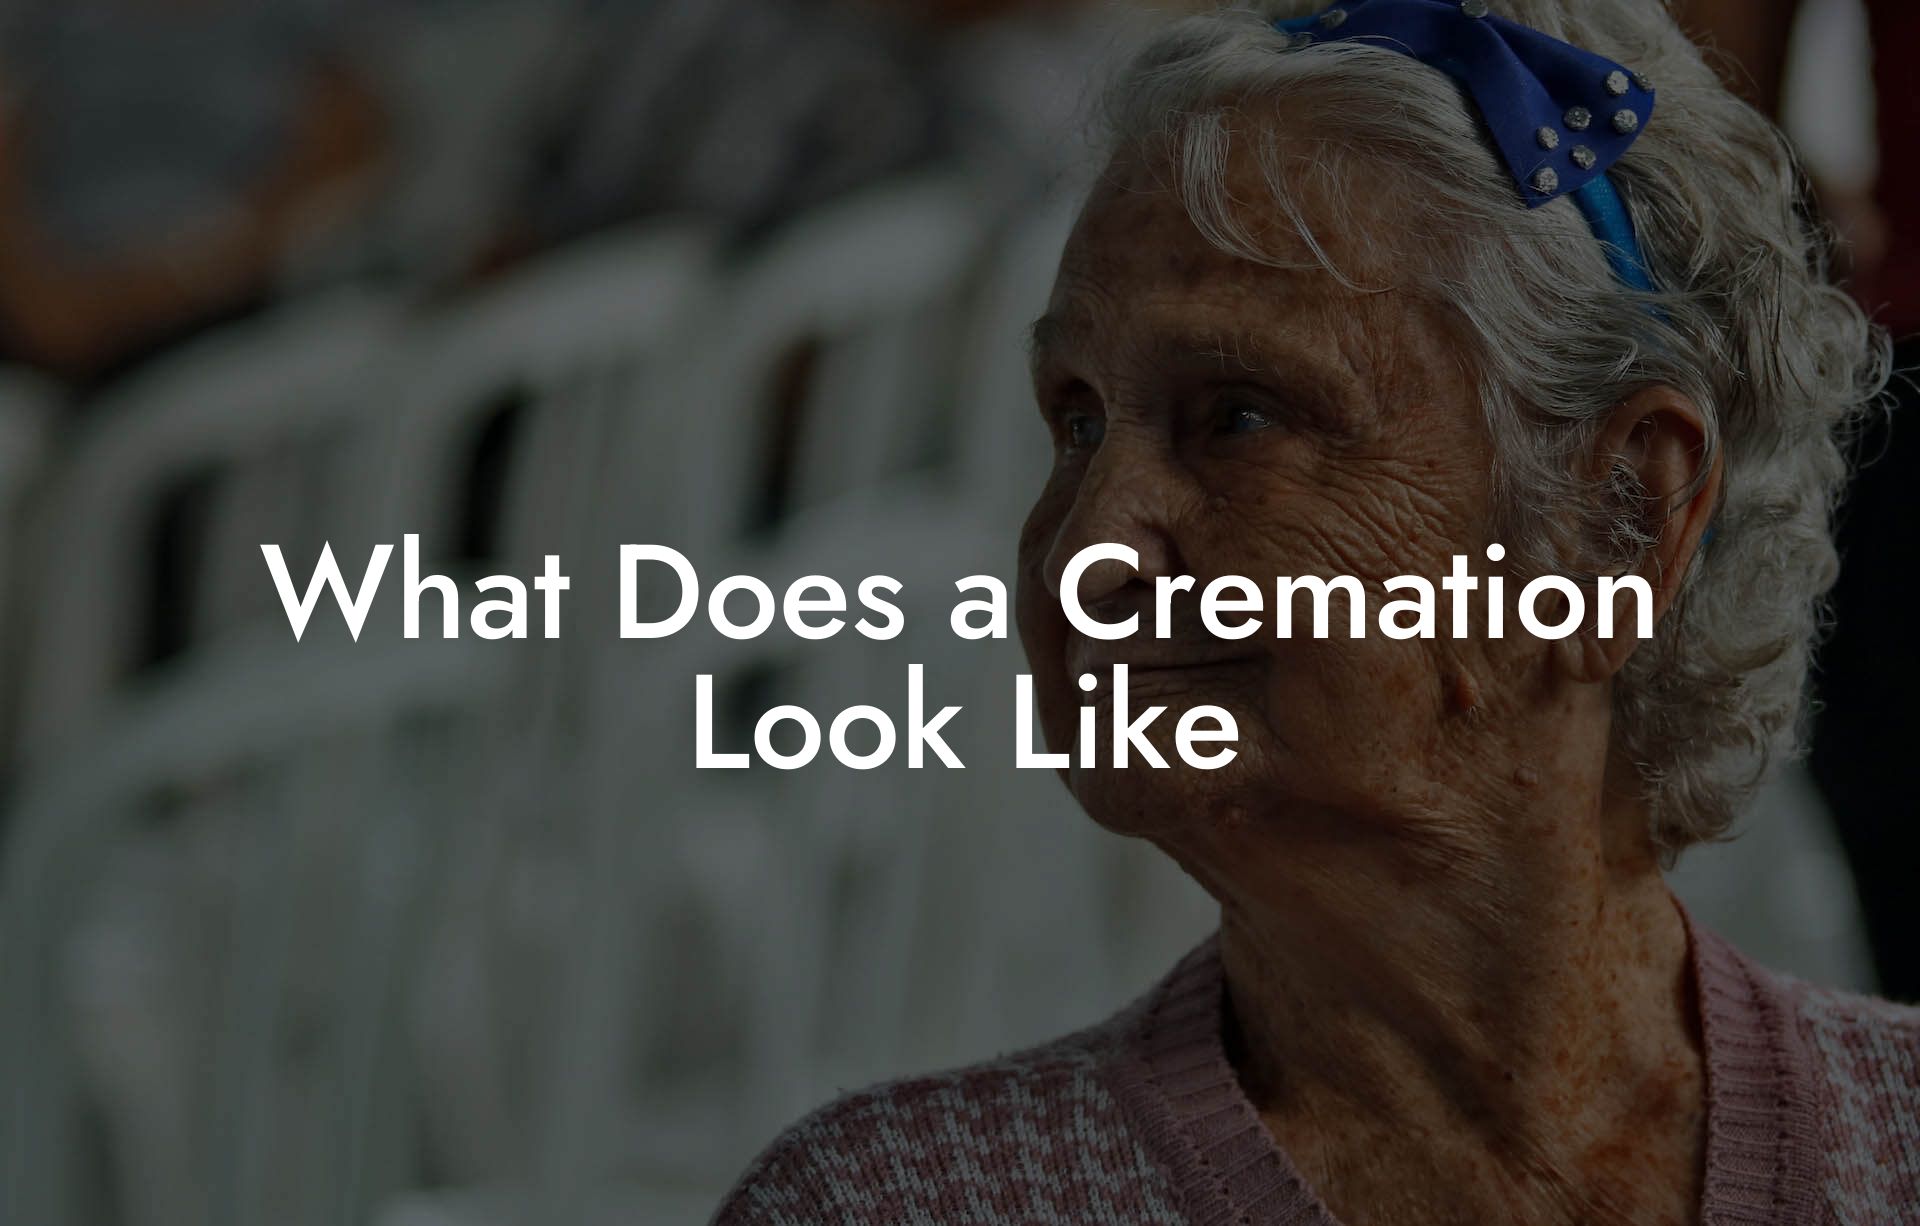 What Does a Cremation Look Like